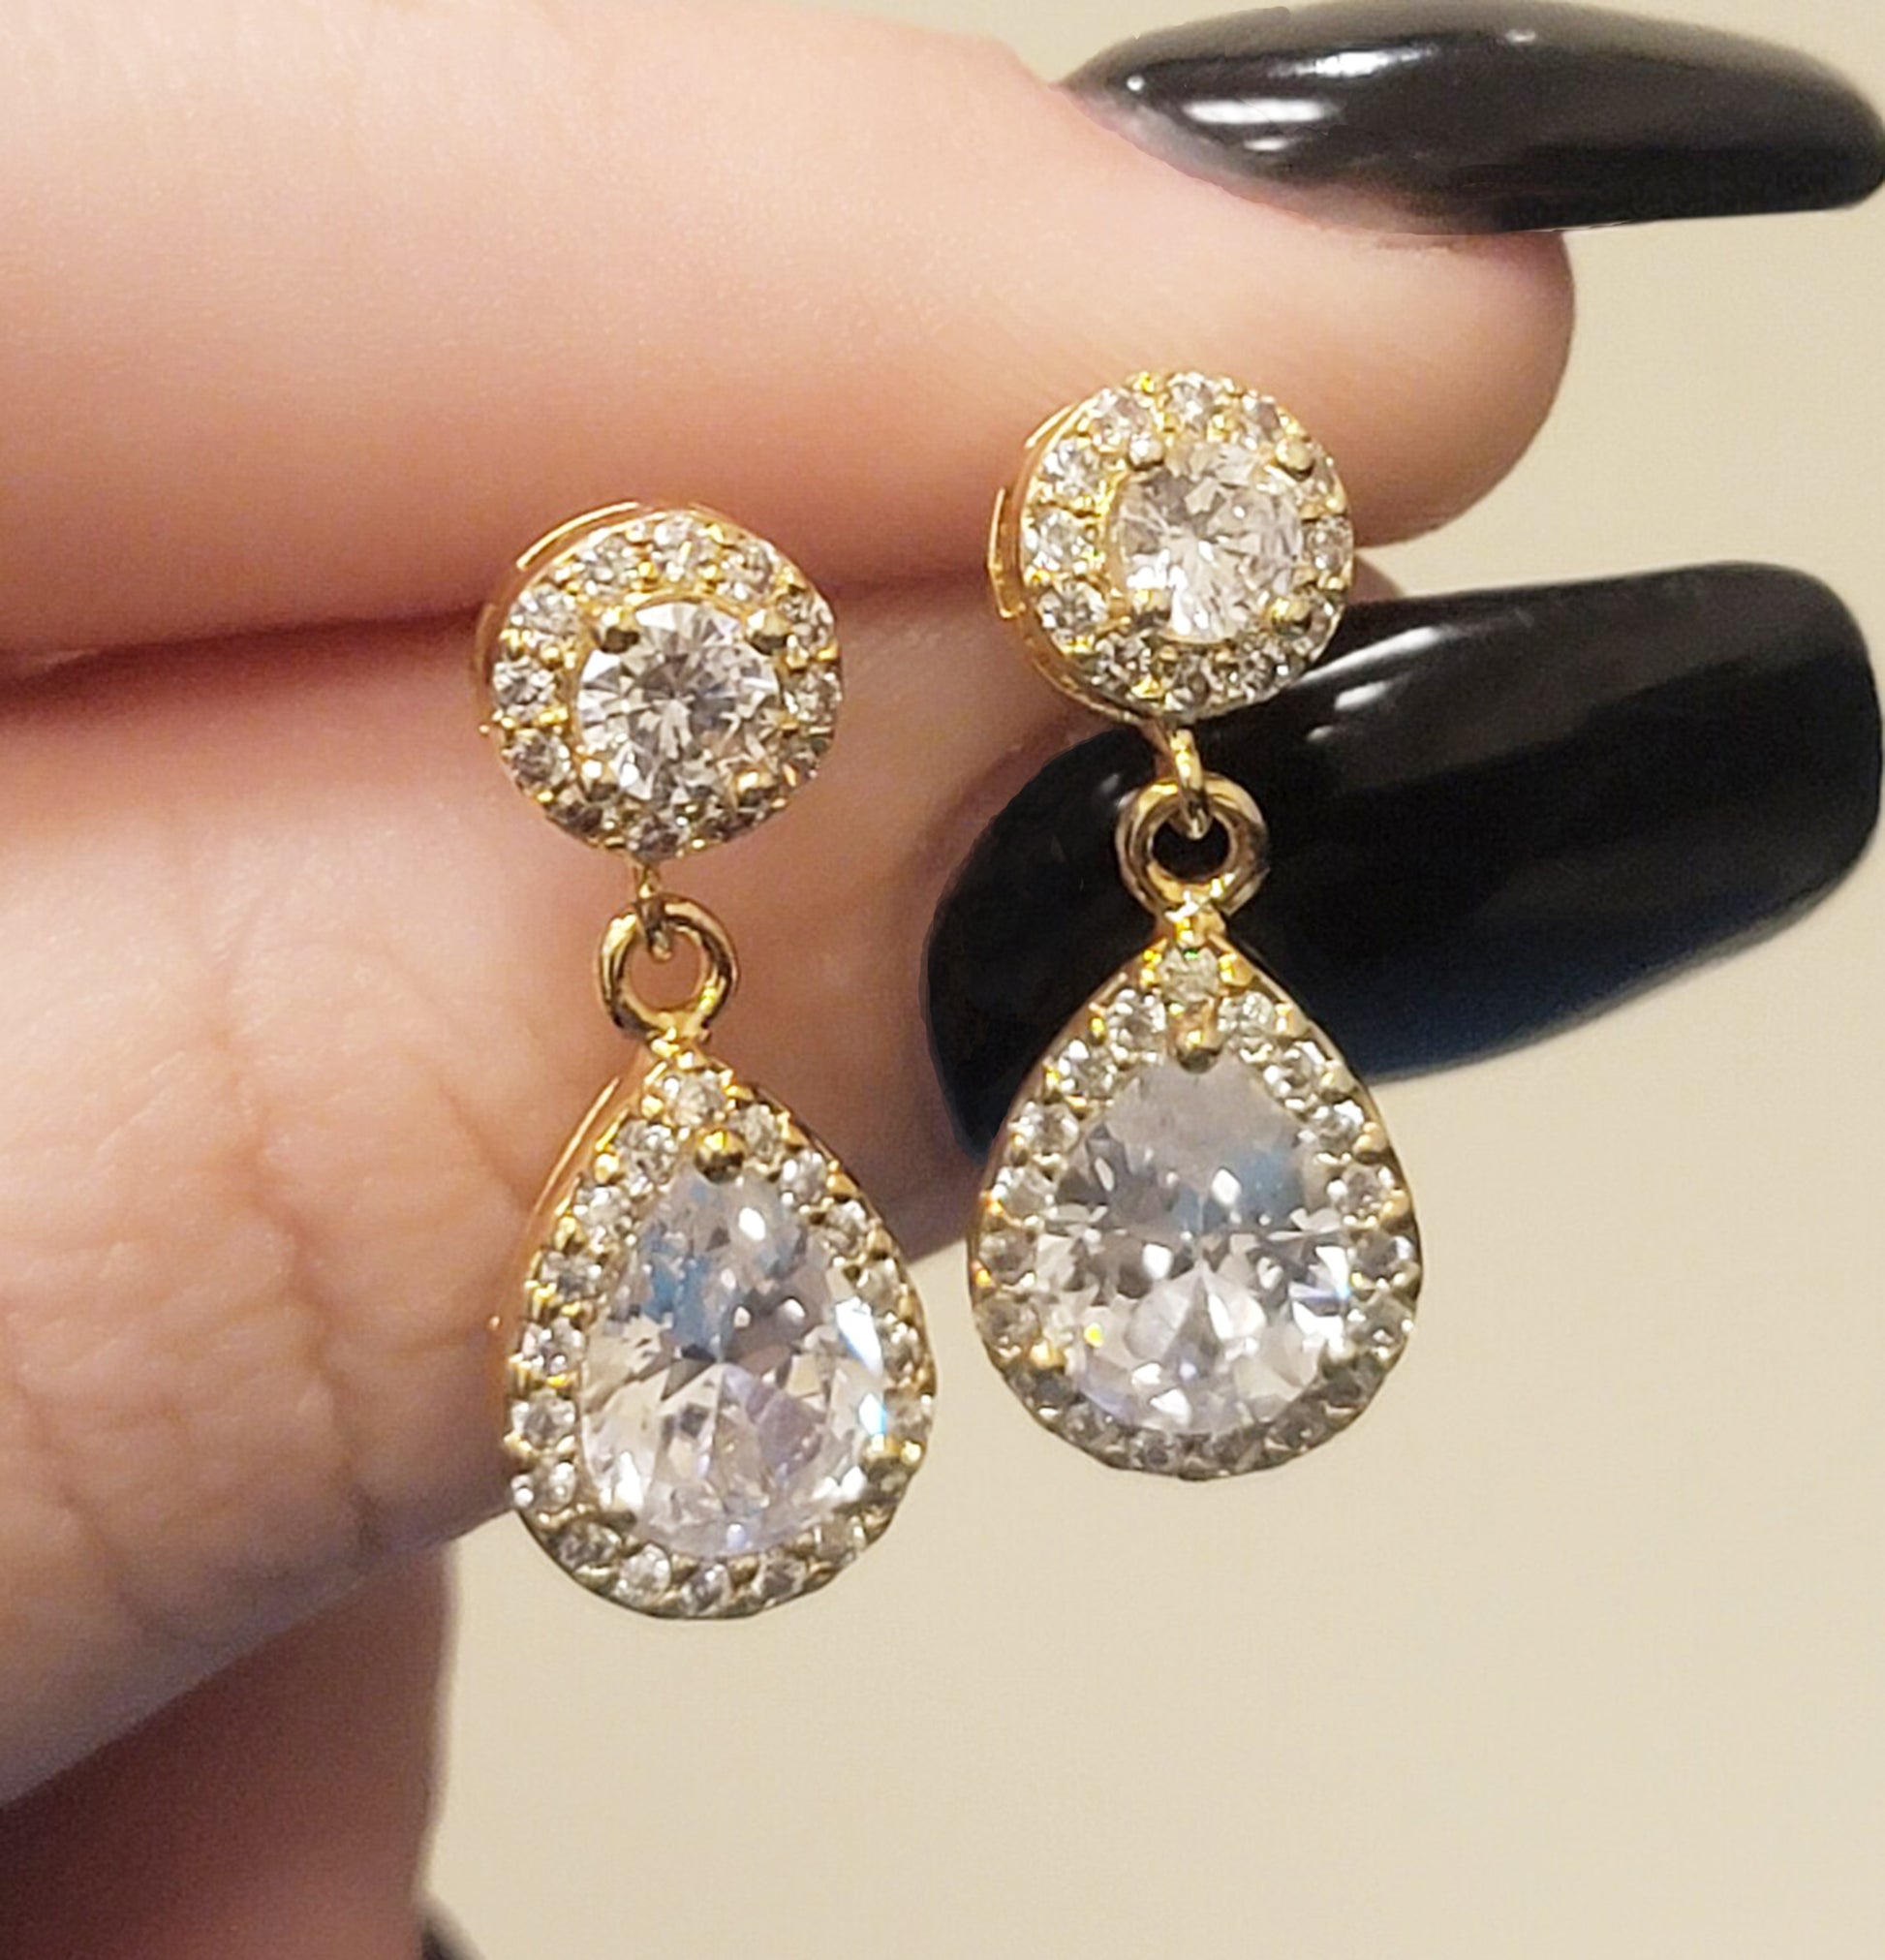 Buy quality Laser crafted cz earrings 22k gold in Rajkot